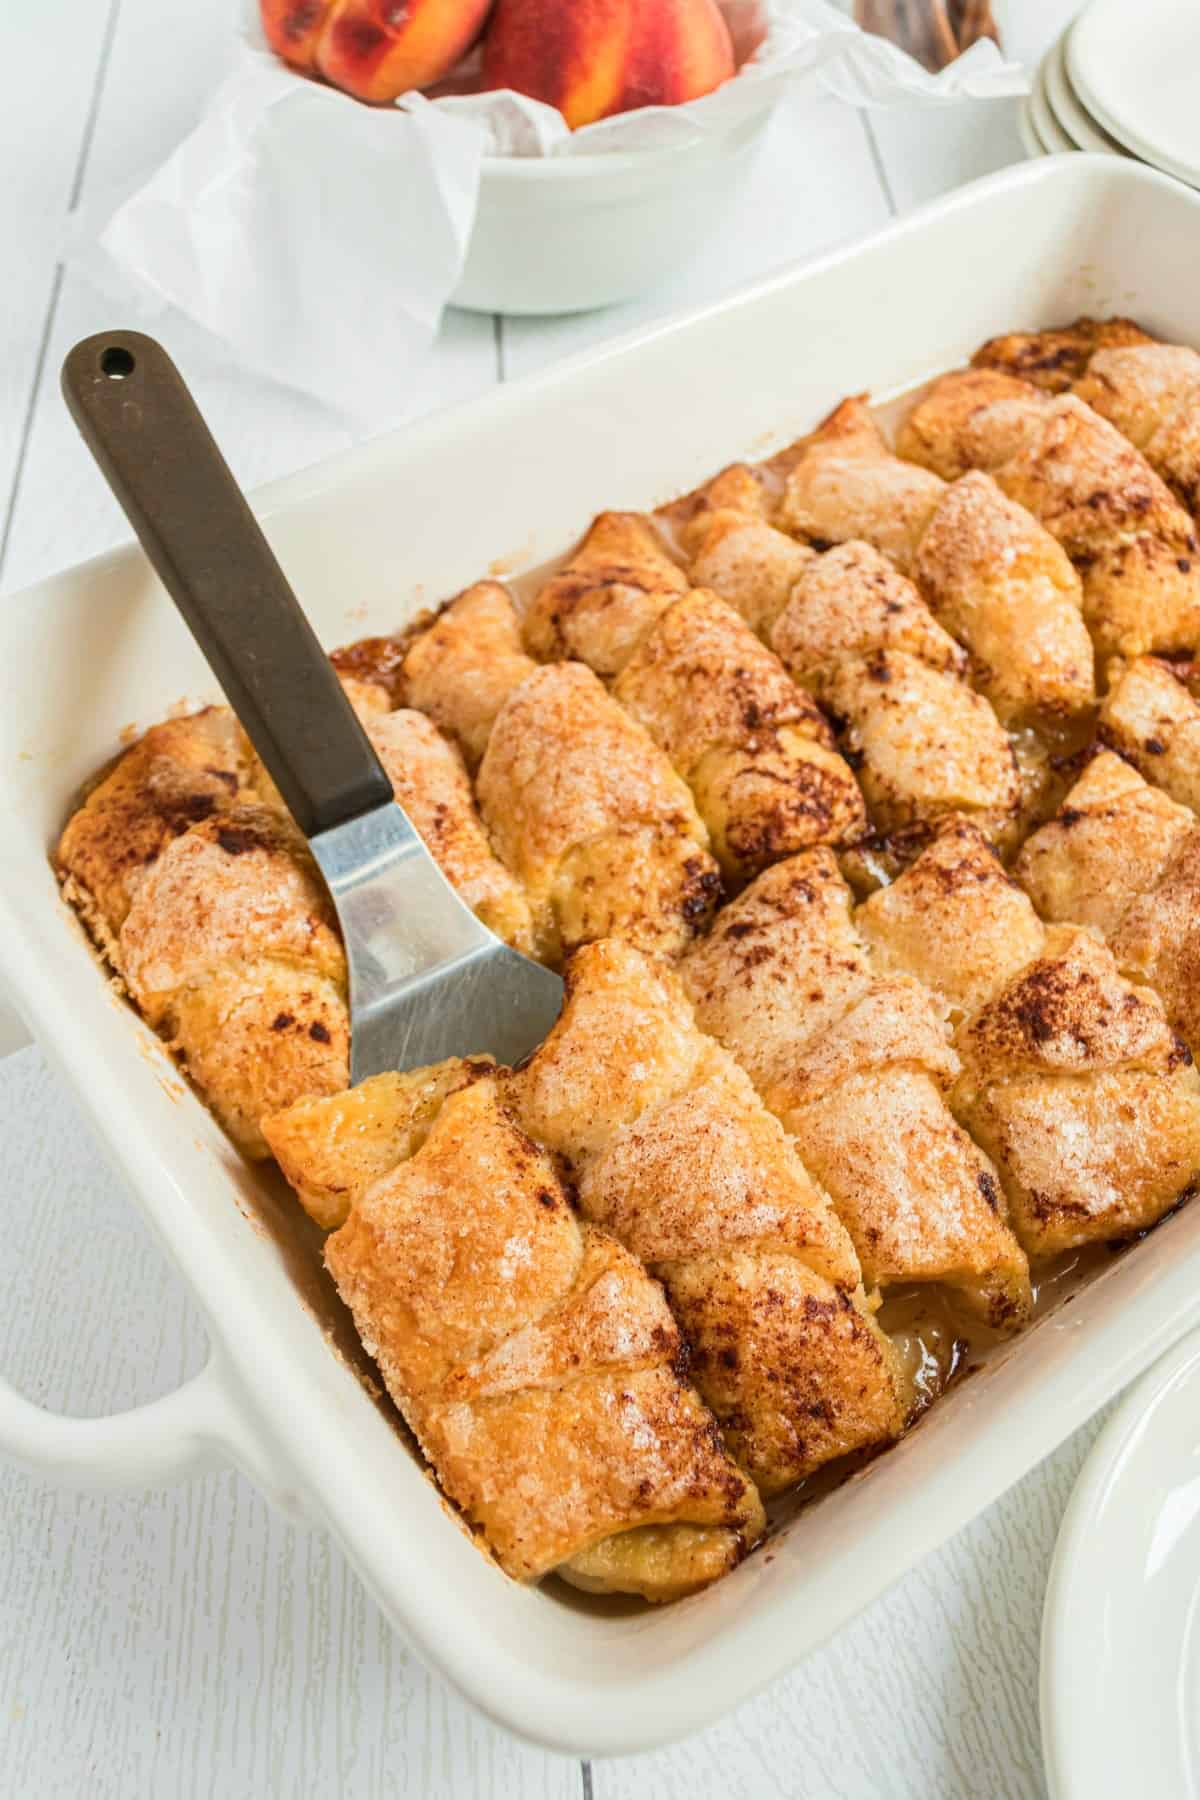 Peach dumplings baked in a 13x9 white baking dish and being removed with spatula.